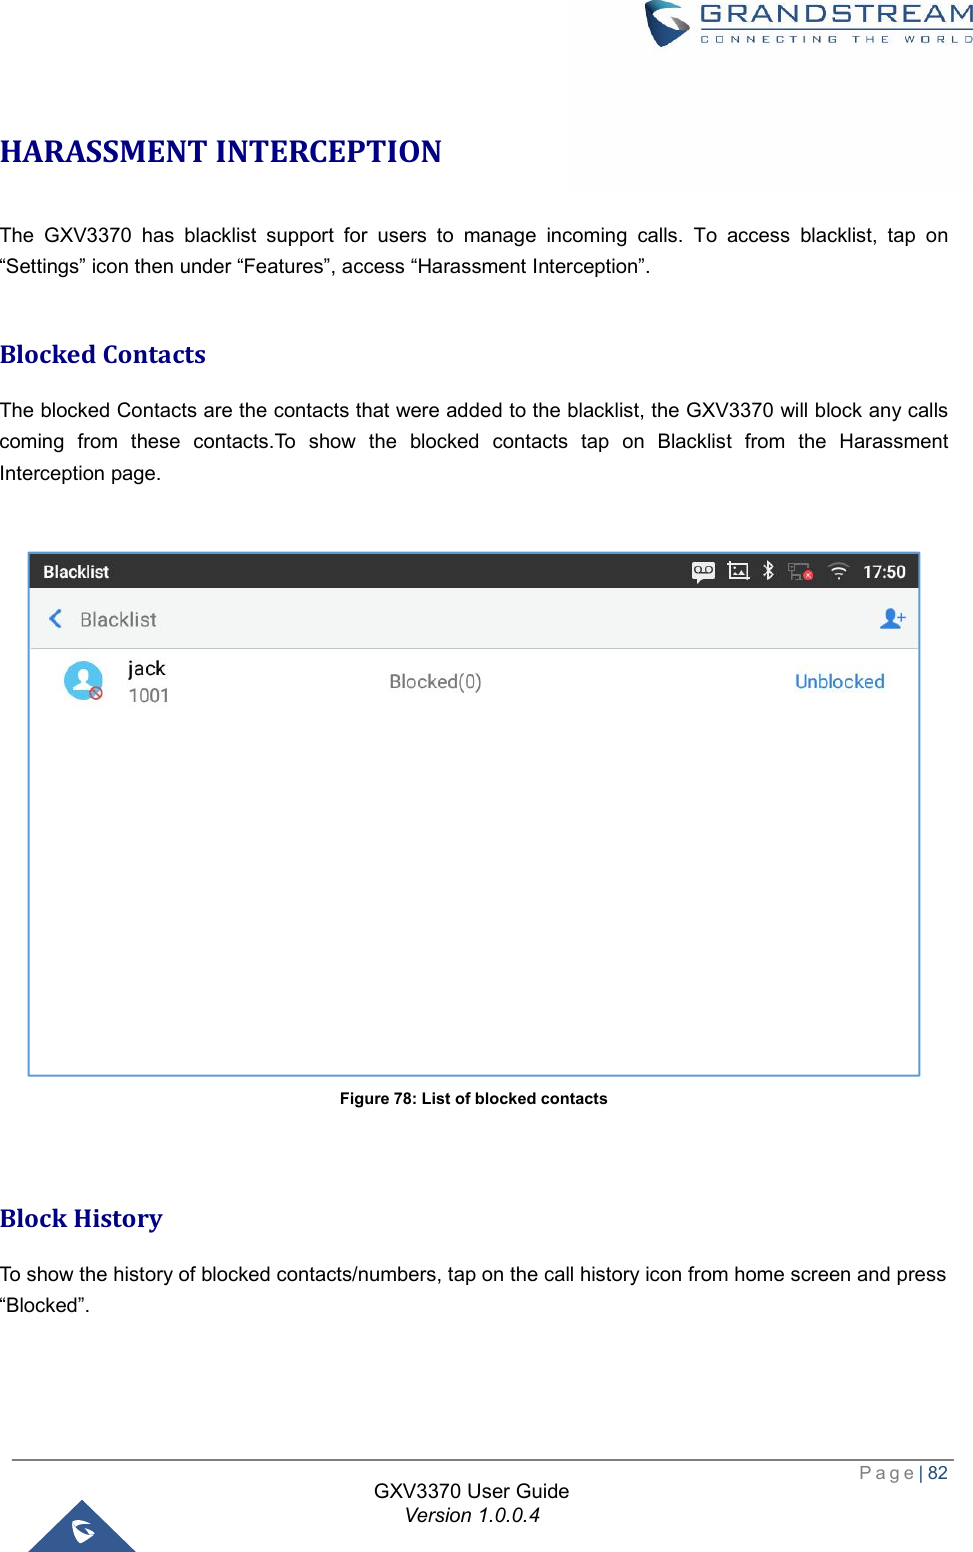  Page| 82  GXV3370 User Guide Version 1.0.0.4  HARASSMENT INTERCEPTION The GXV3370 has blacklist support for users to manage incoming calls. To access blacklist, tap on “Settings” icon then under “Features”, access “Harassment Interception”.  Blocked Contacts The blocked Contacts are the contacts that were added to the blacklist, the GXV3370 will block any calls coming from these contacts.To show the blocked contacts tap on Blacklist from the Harassment Interception page.   Figure 78: List of blocked contacts   Block History To show the history of blocked contacts/numbers, tap on the call history icon from home screen and press  “Blocked”. 